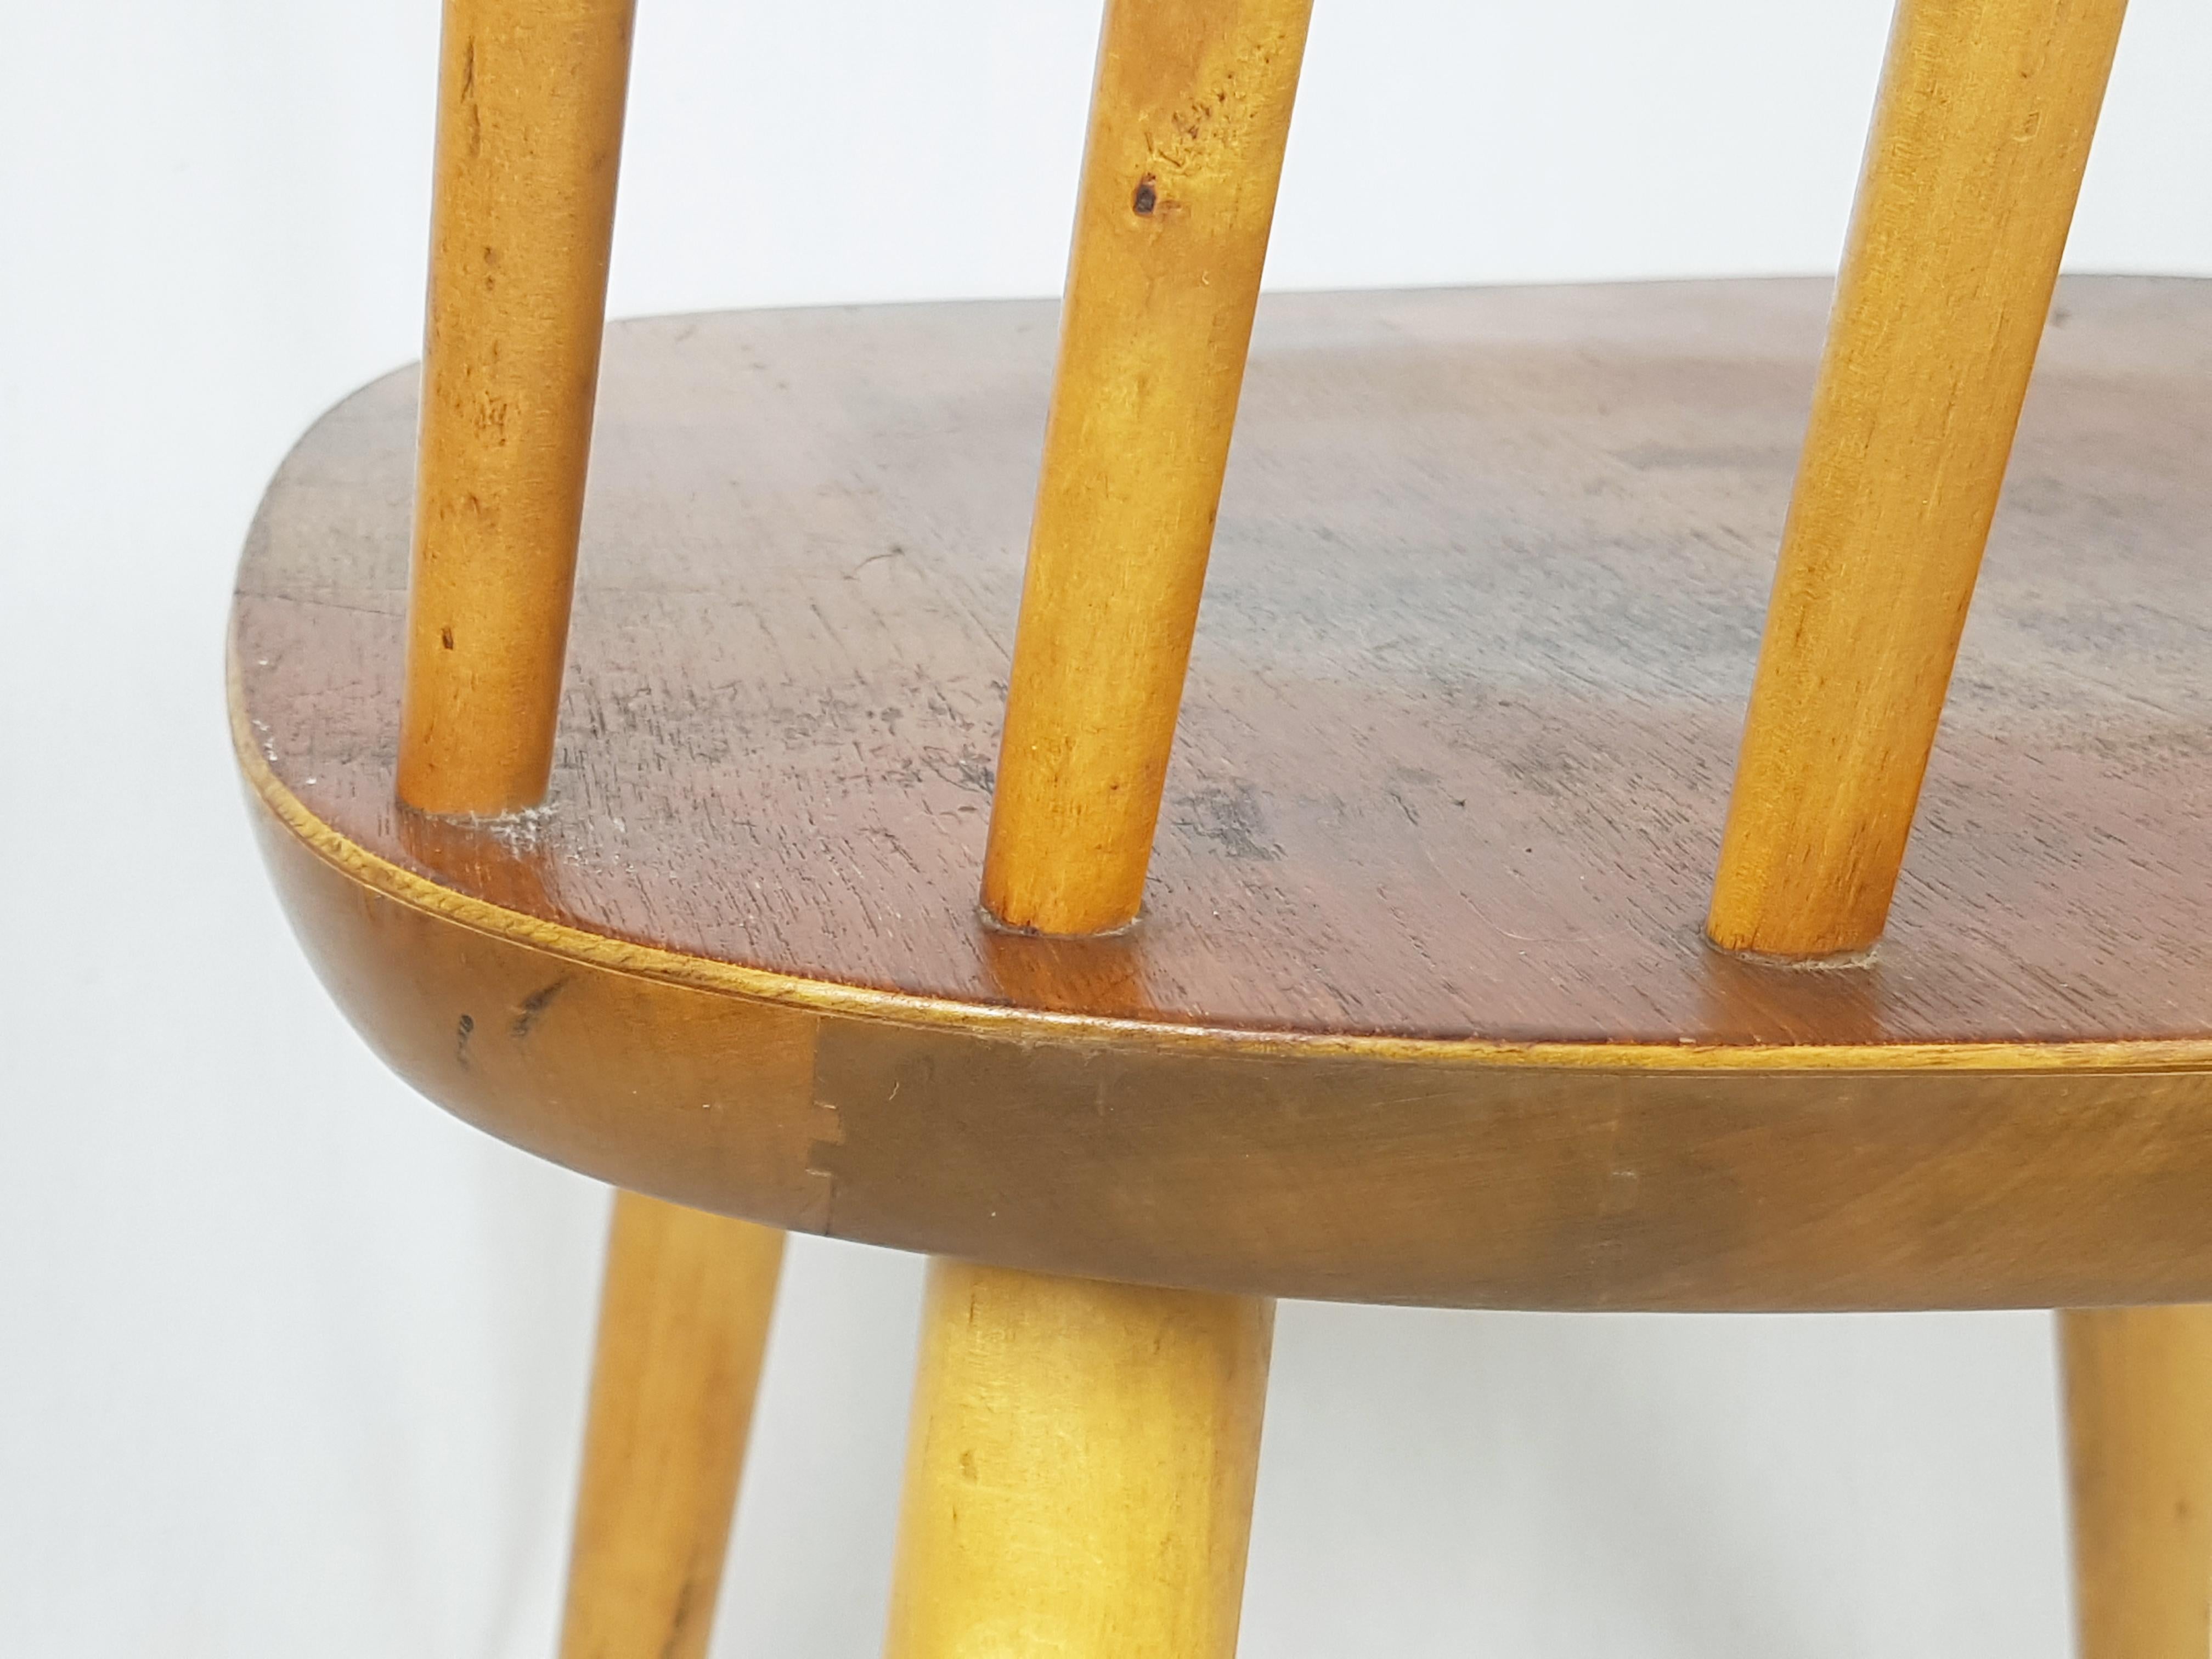 Wooden Mid-Century Modern Pinocchio Chair by Yngve Ekström for Stolab For Sale 2